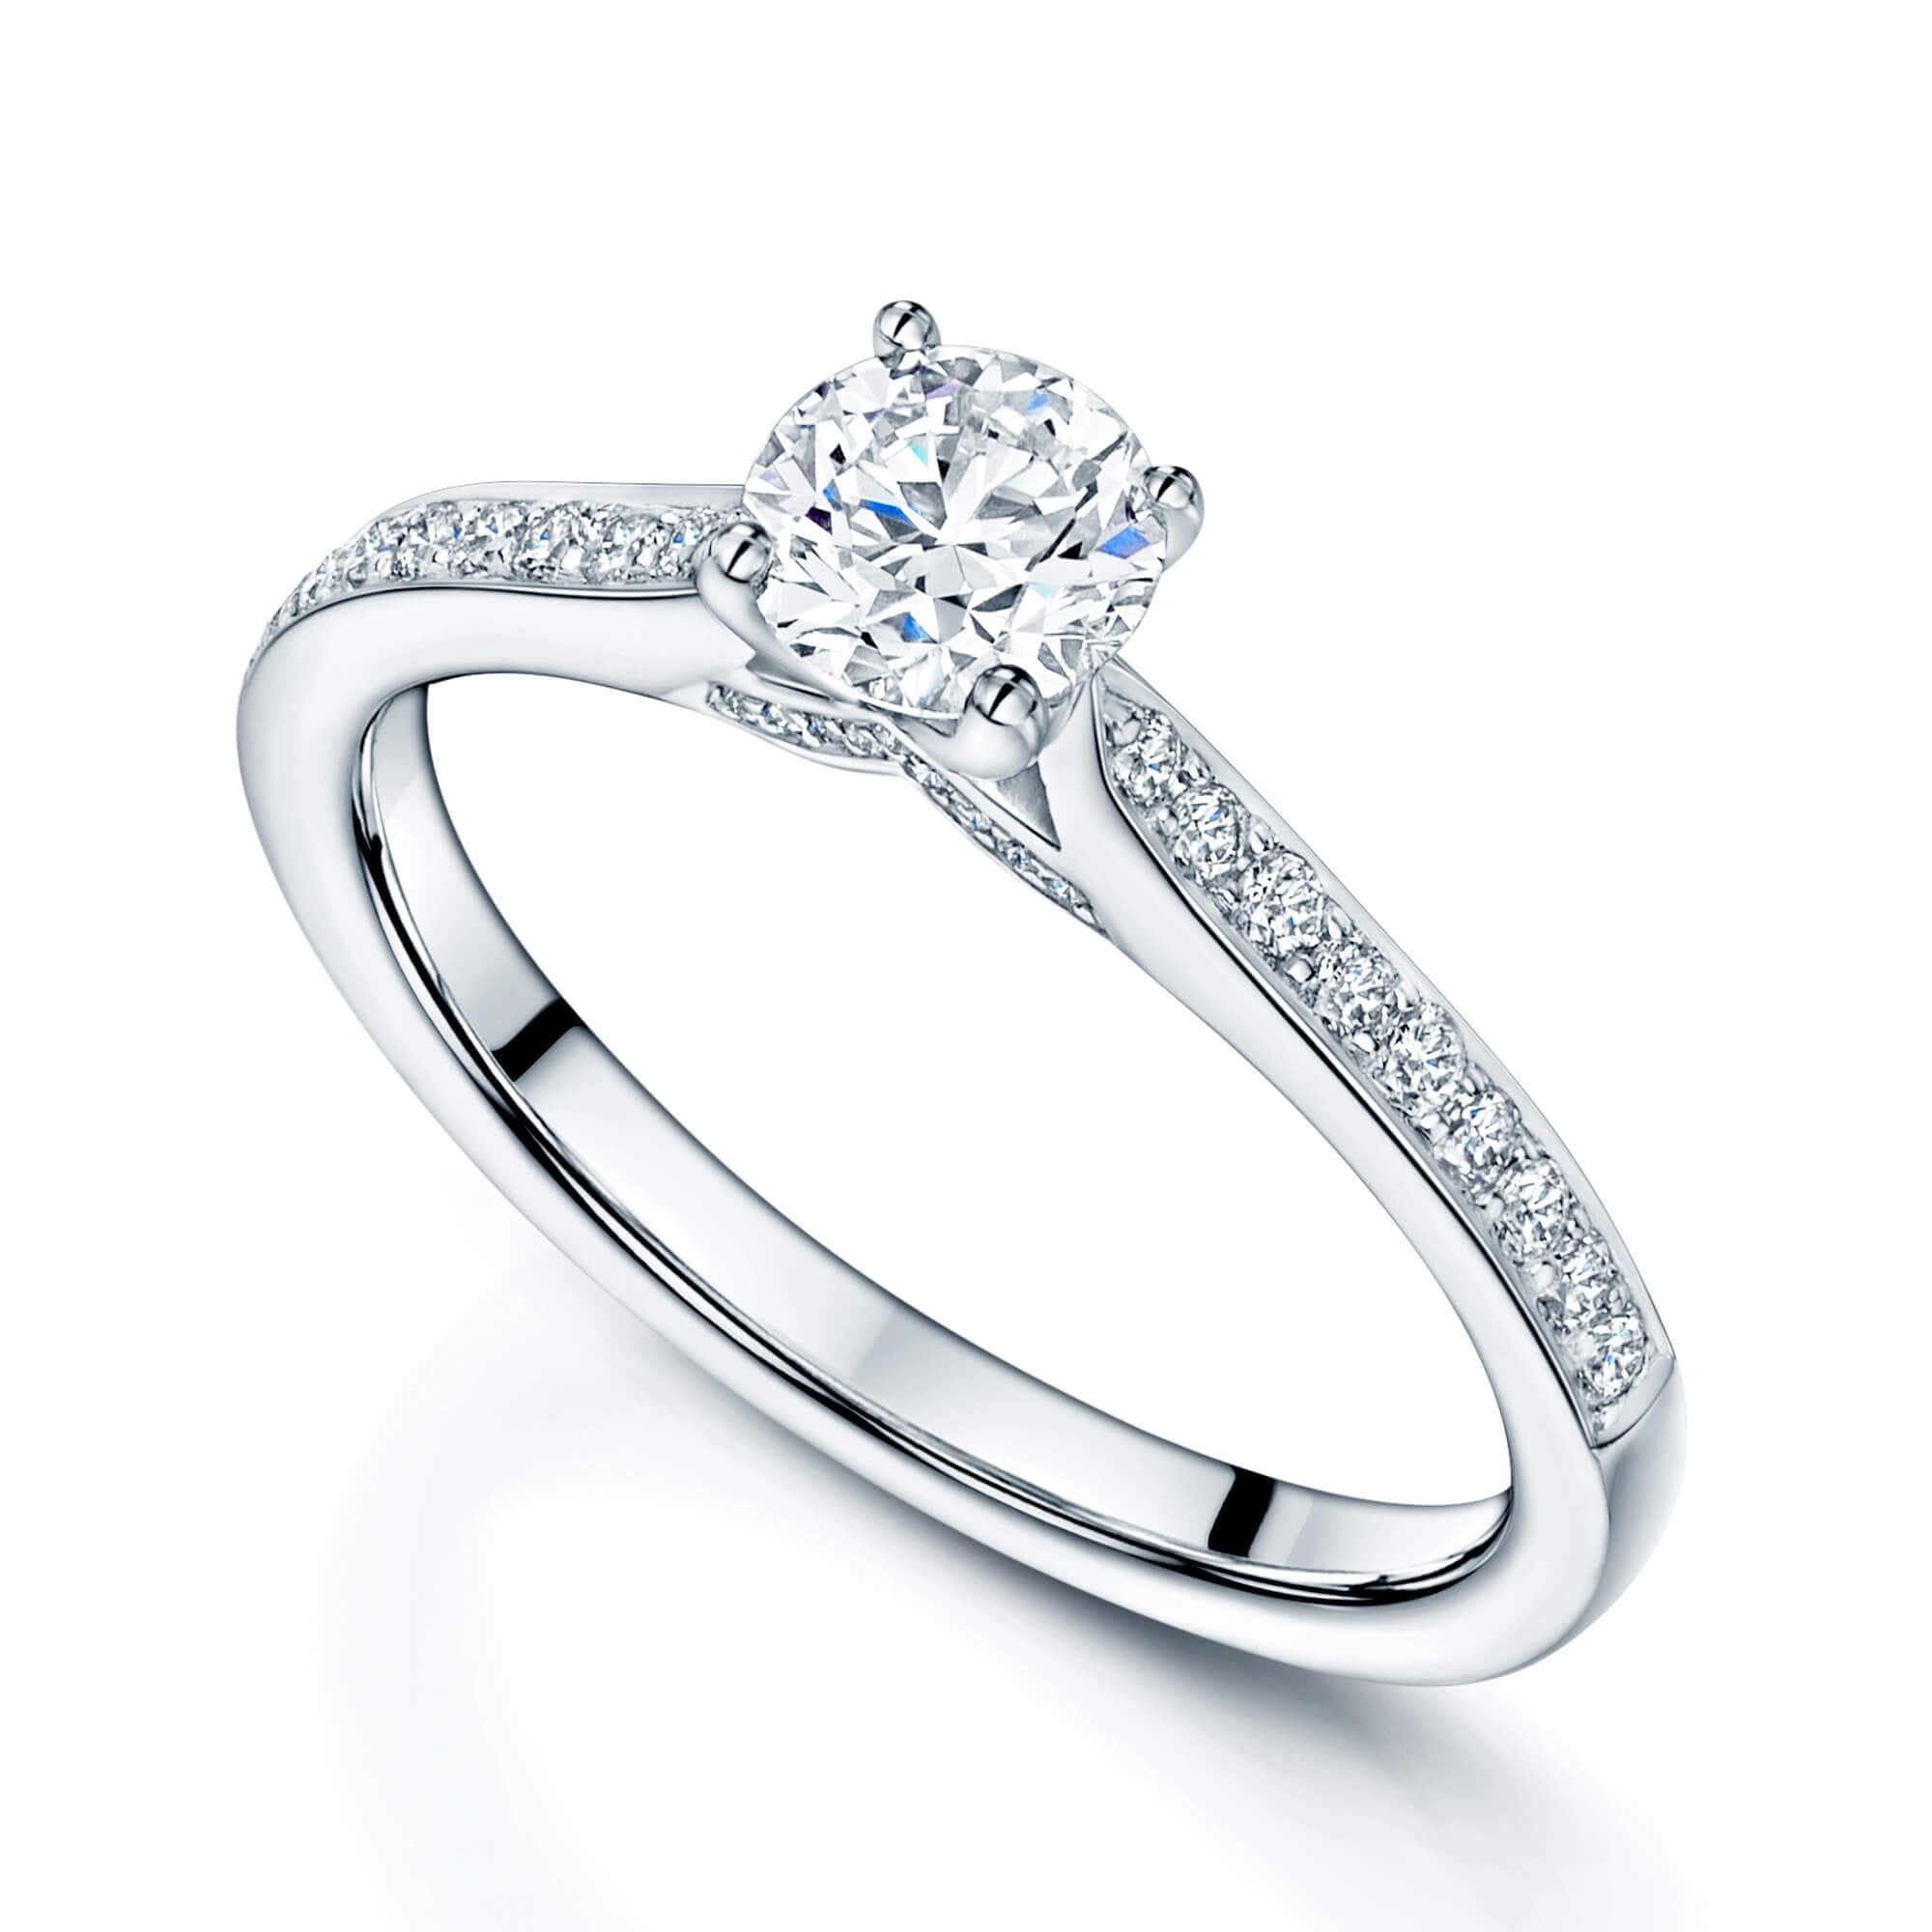 Platinum GIA Certificated Round Brilliant Cut Diamond Ring With Diamond Underbezel And Shoulders